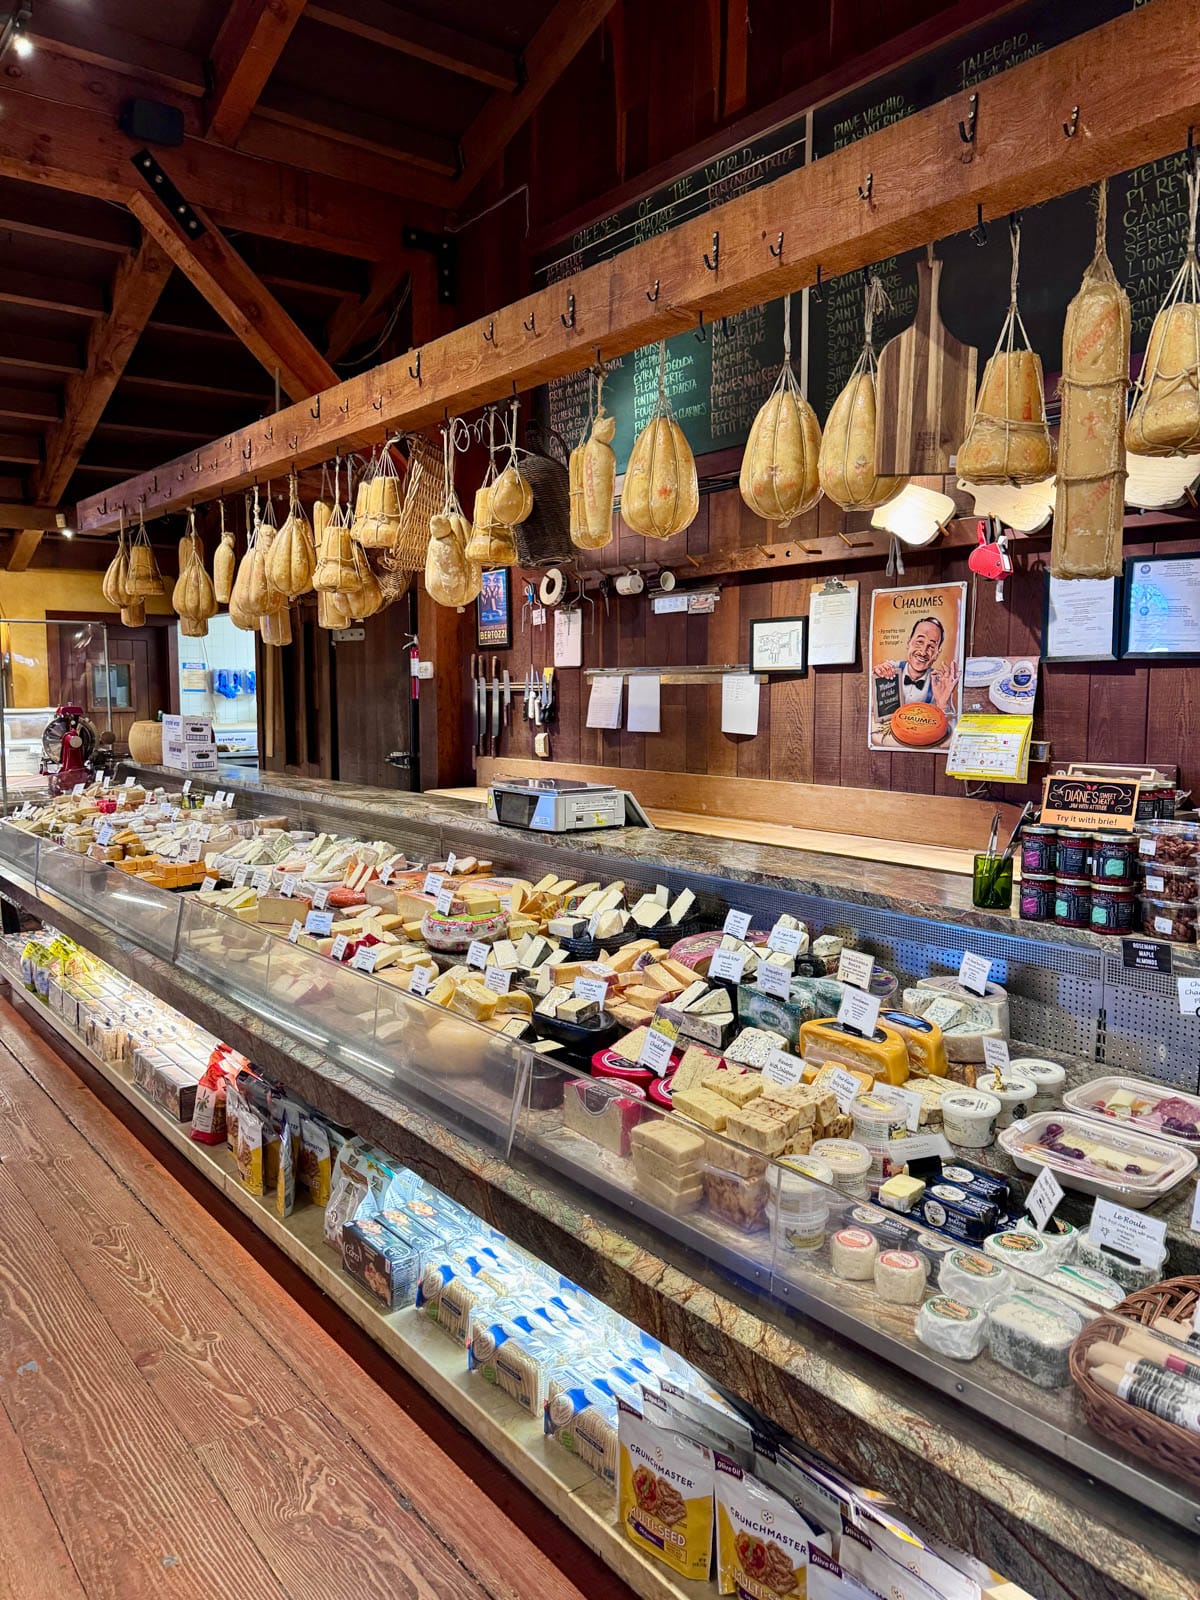 Counter in store with meat hanging above and cheeses in the case.